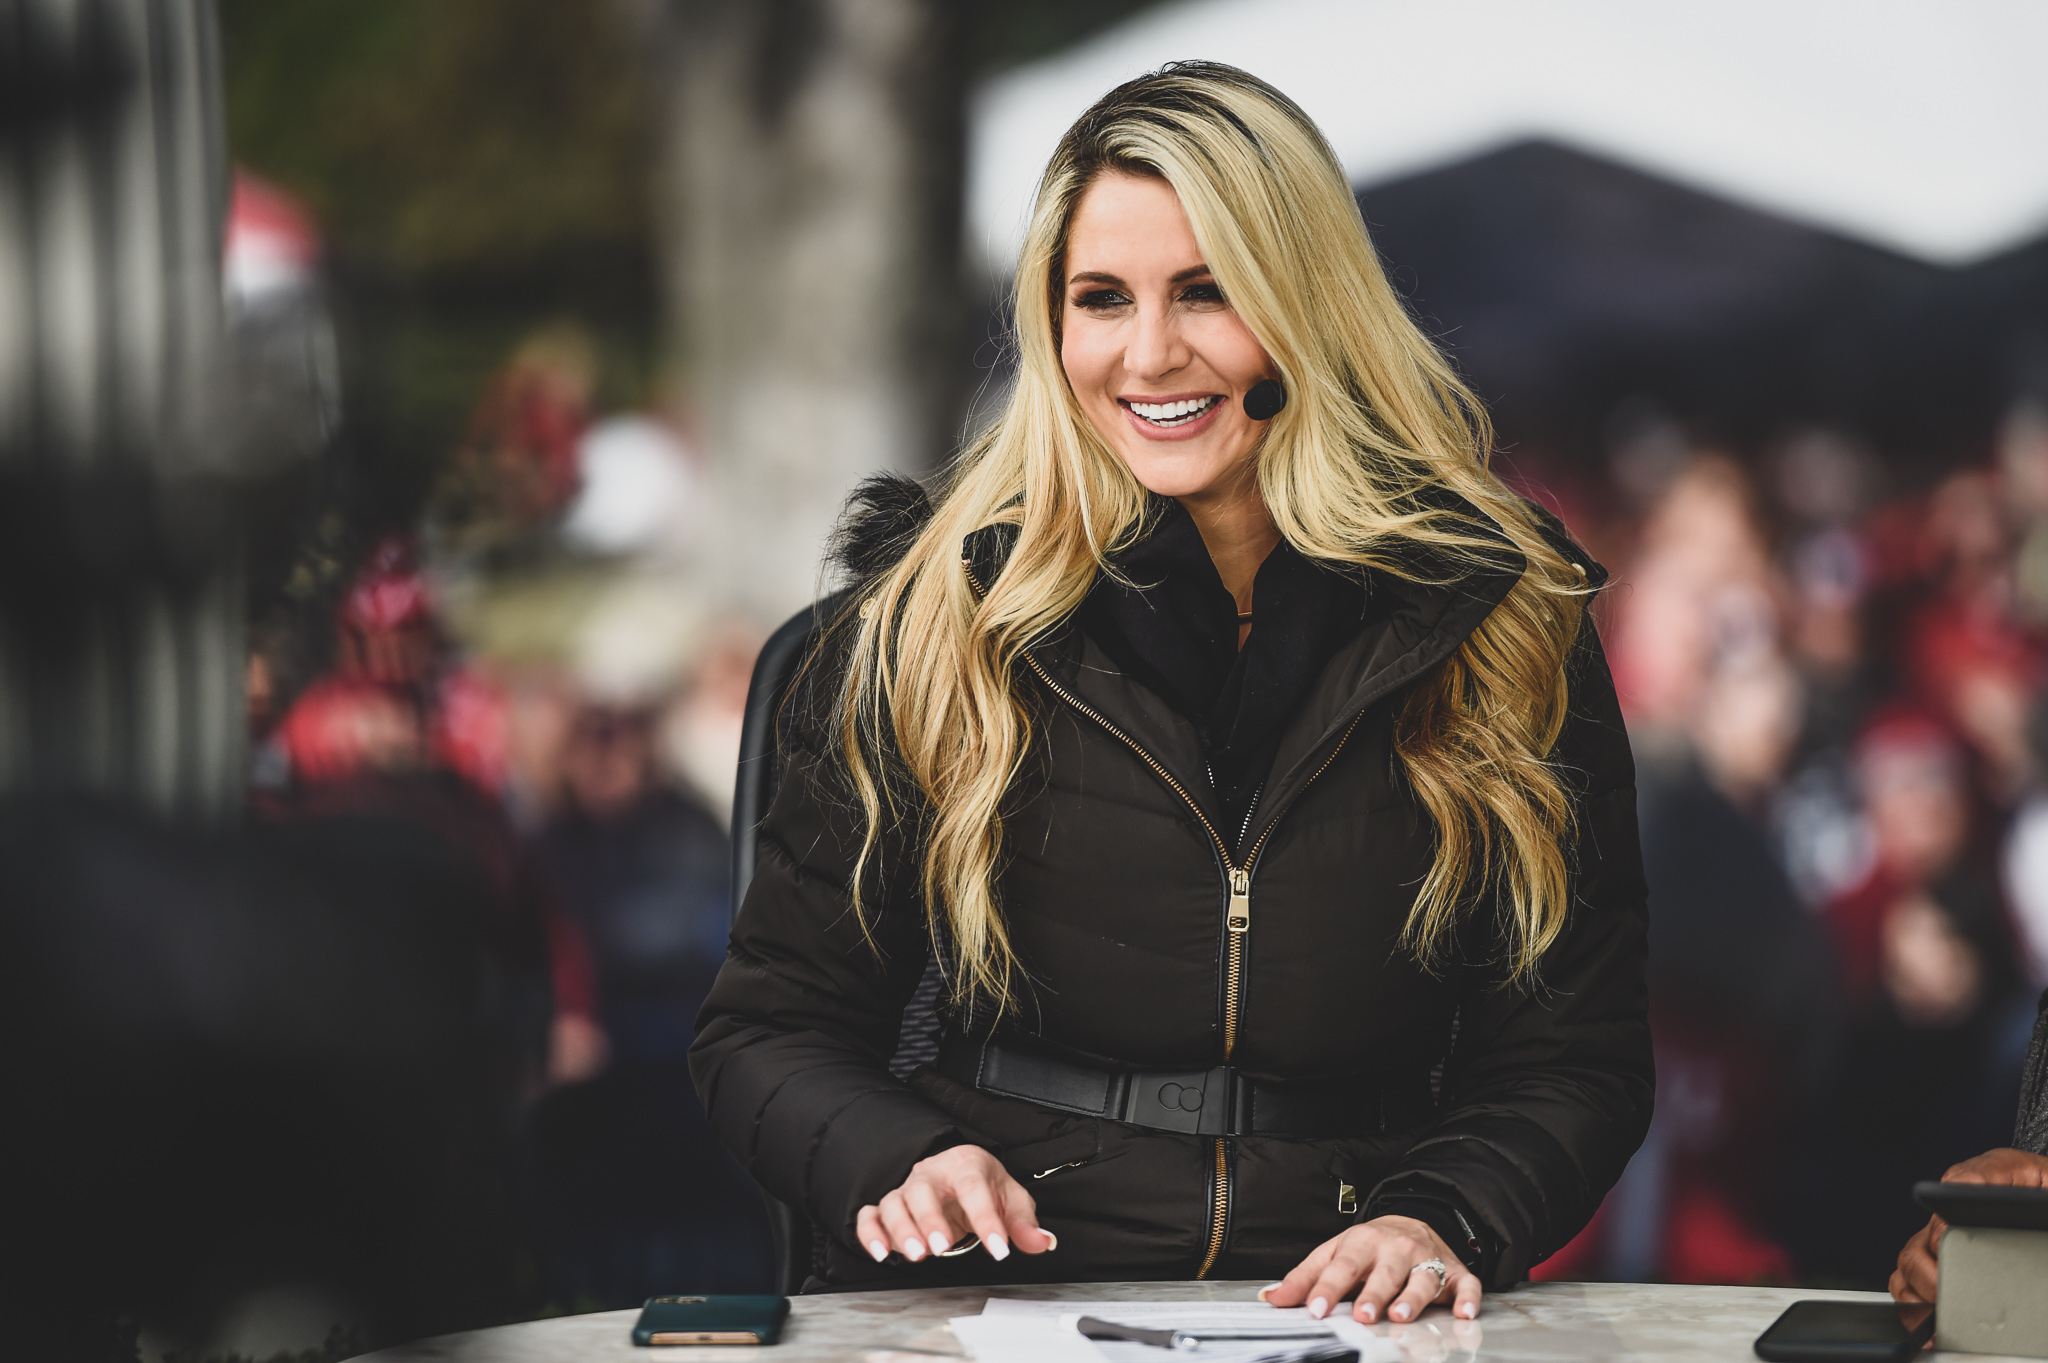 ESPNs Laura Rutledge set to take over as NFL Live host, reports say